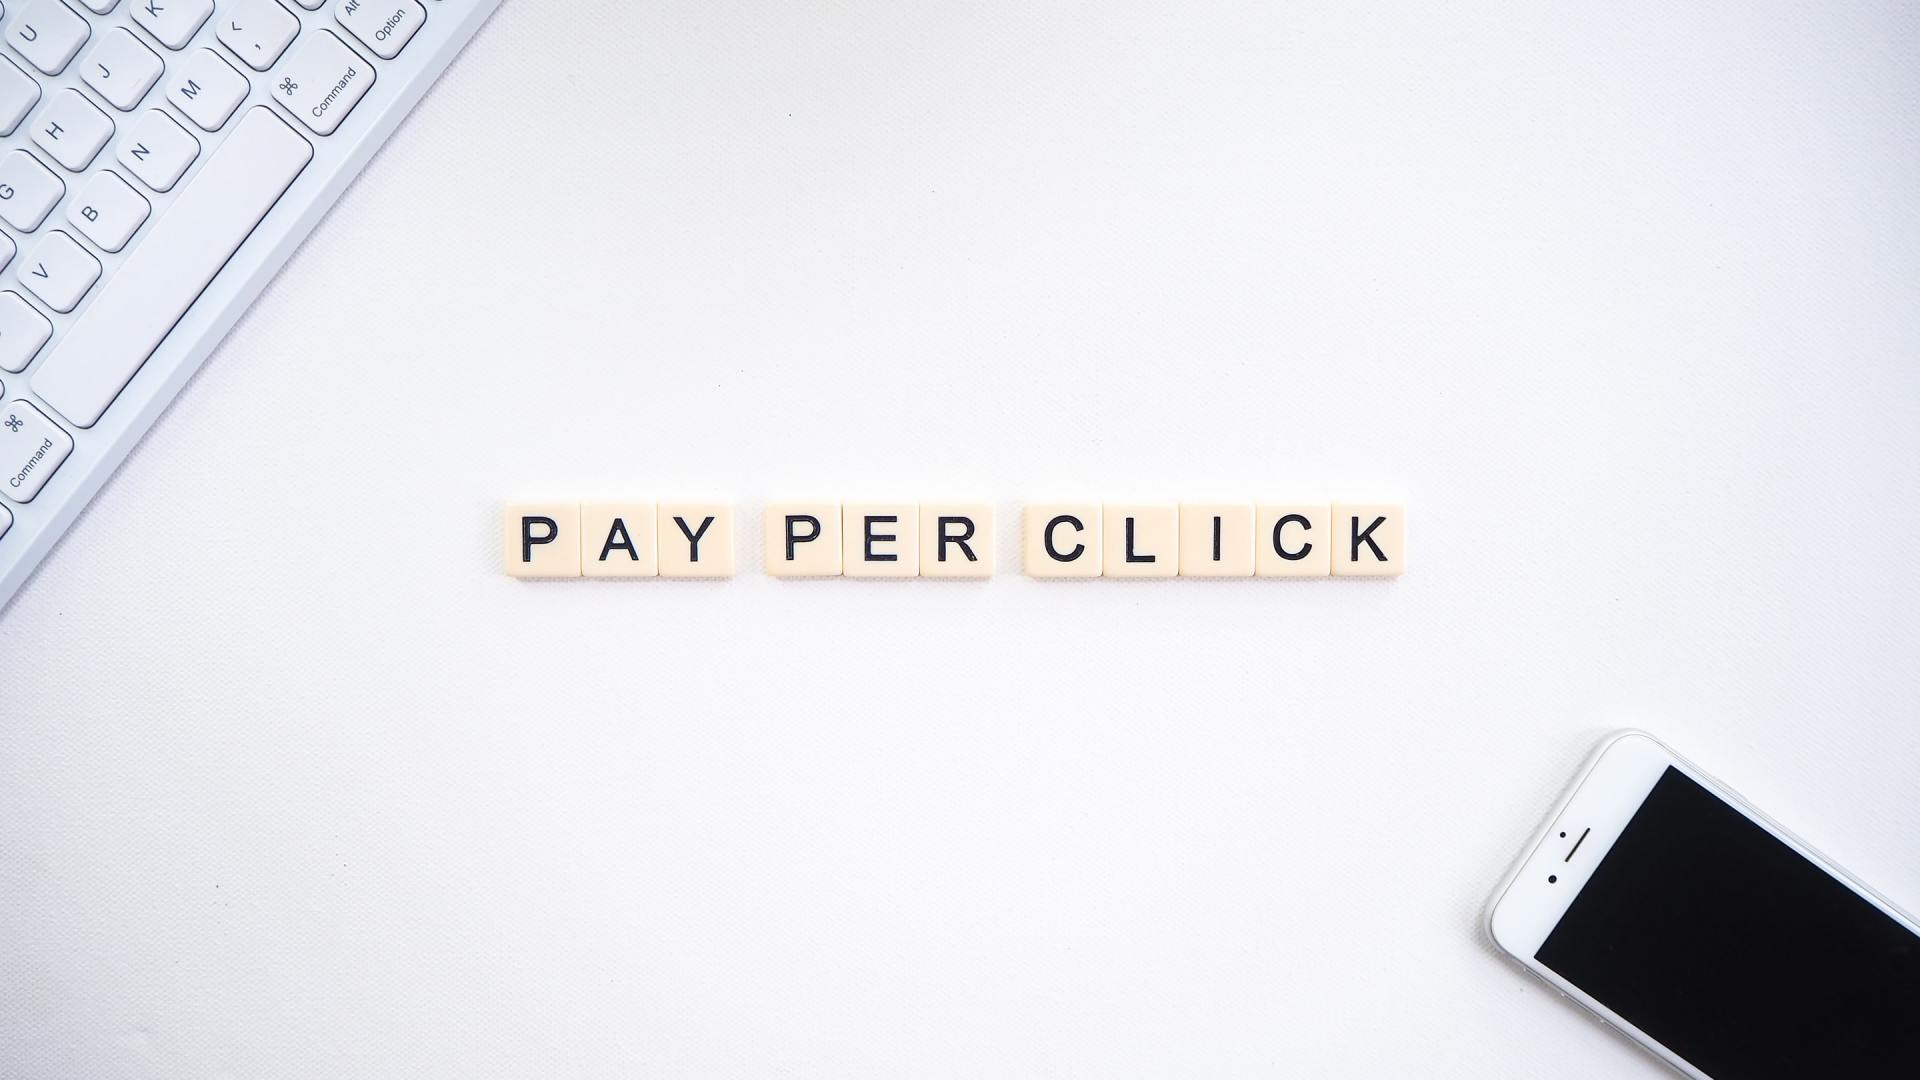 pay per click spelled out on scrabble tiles